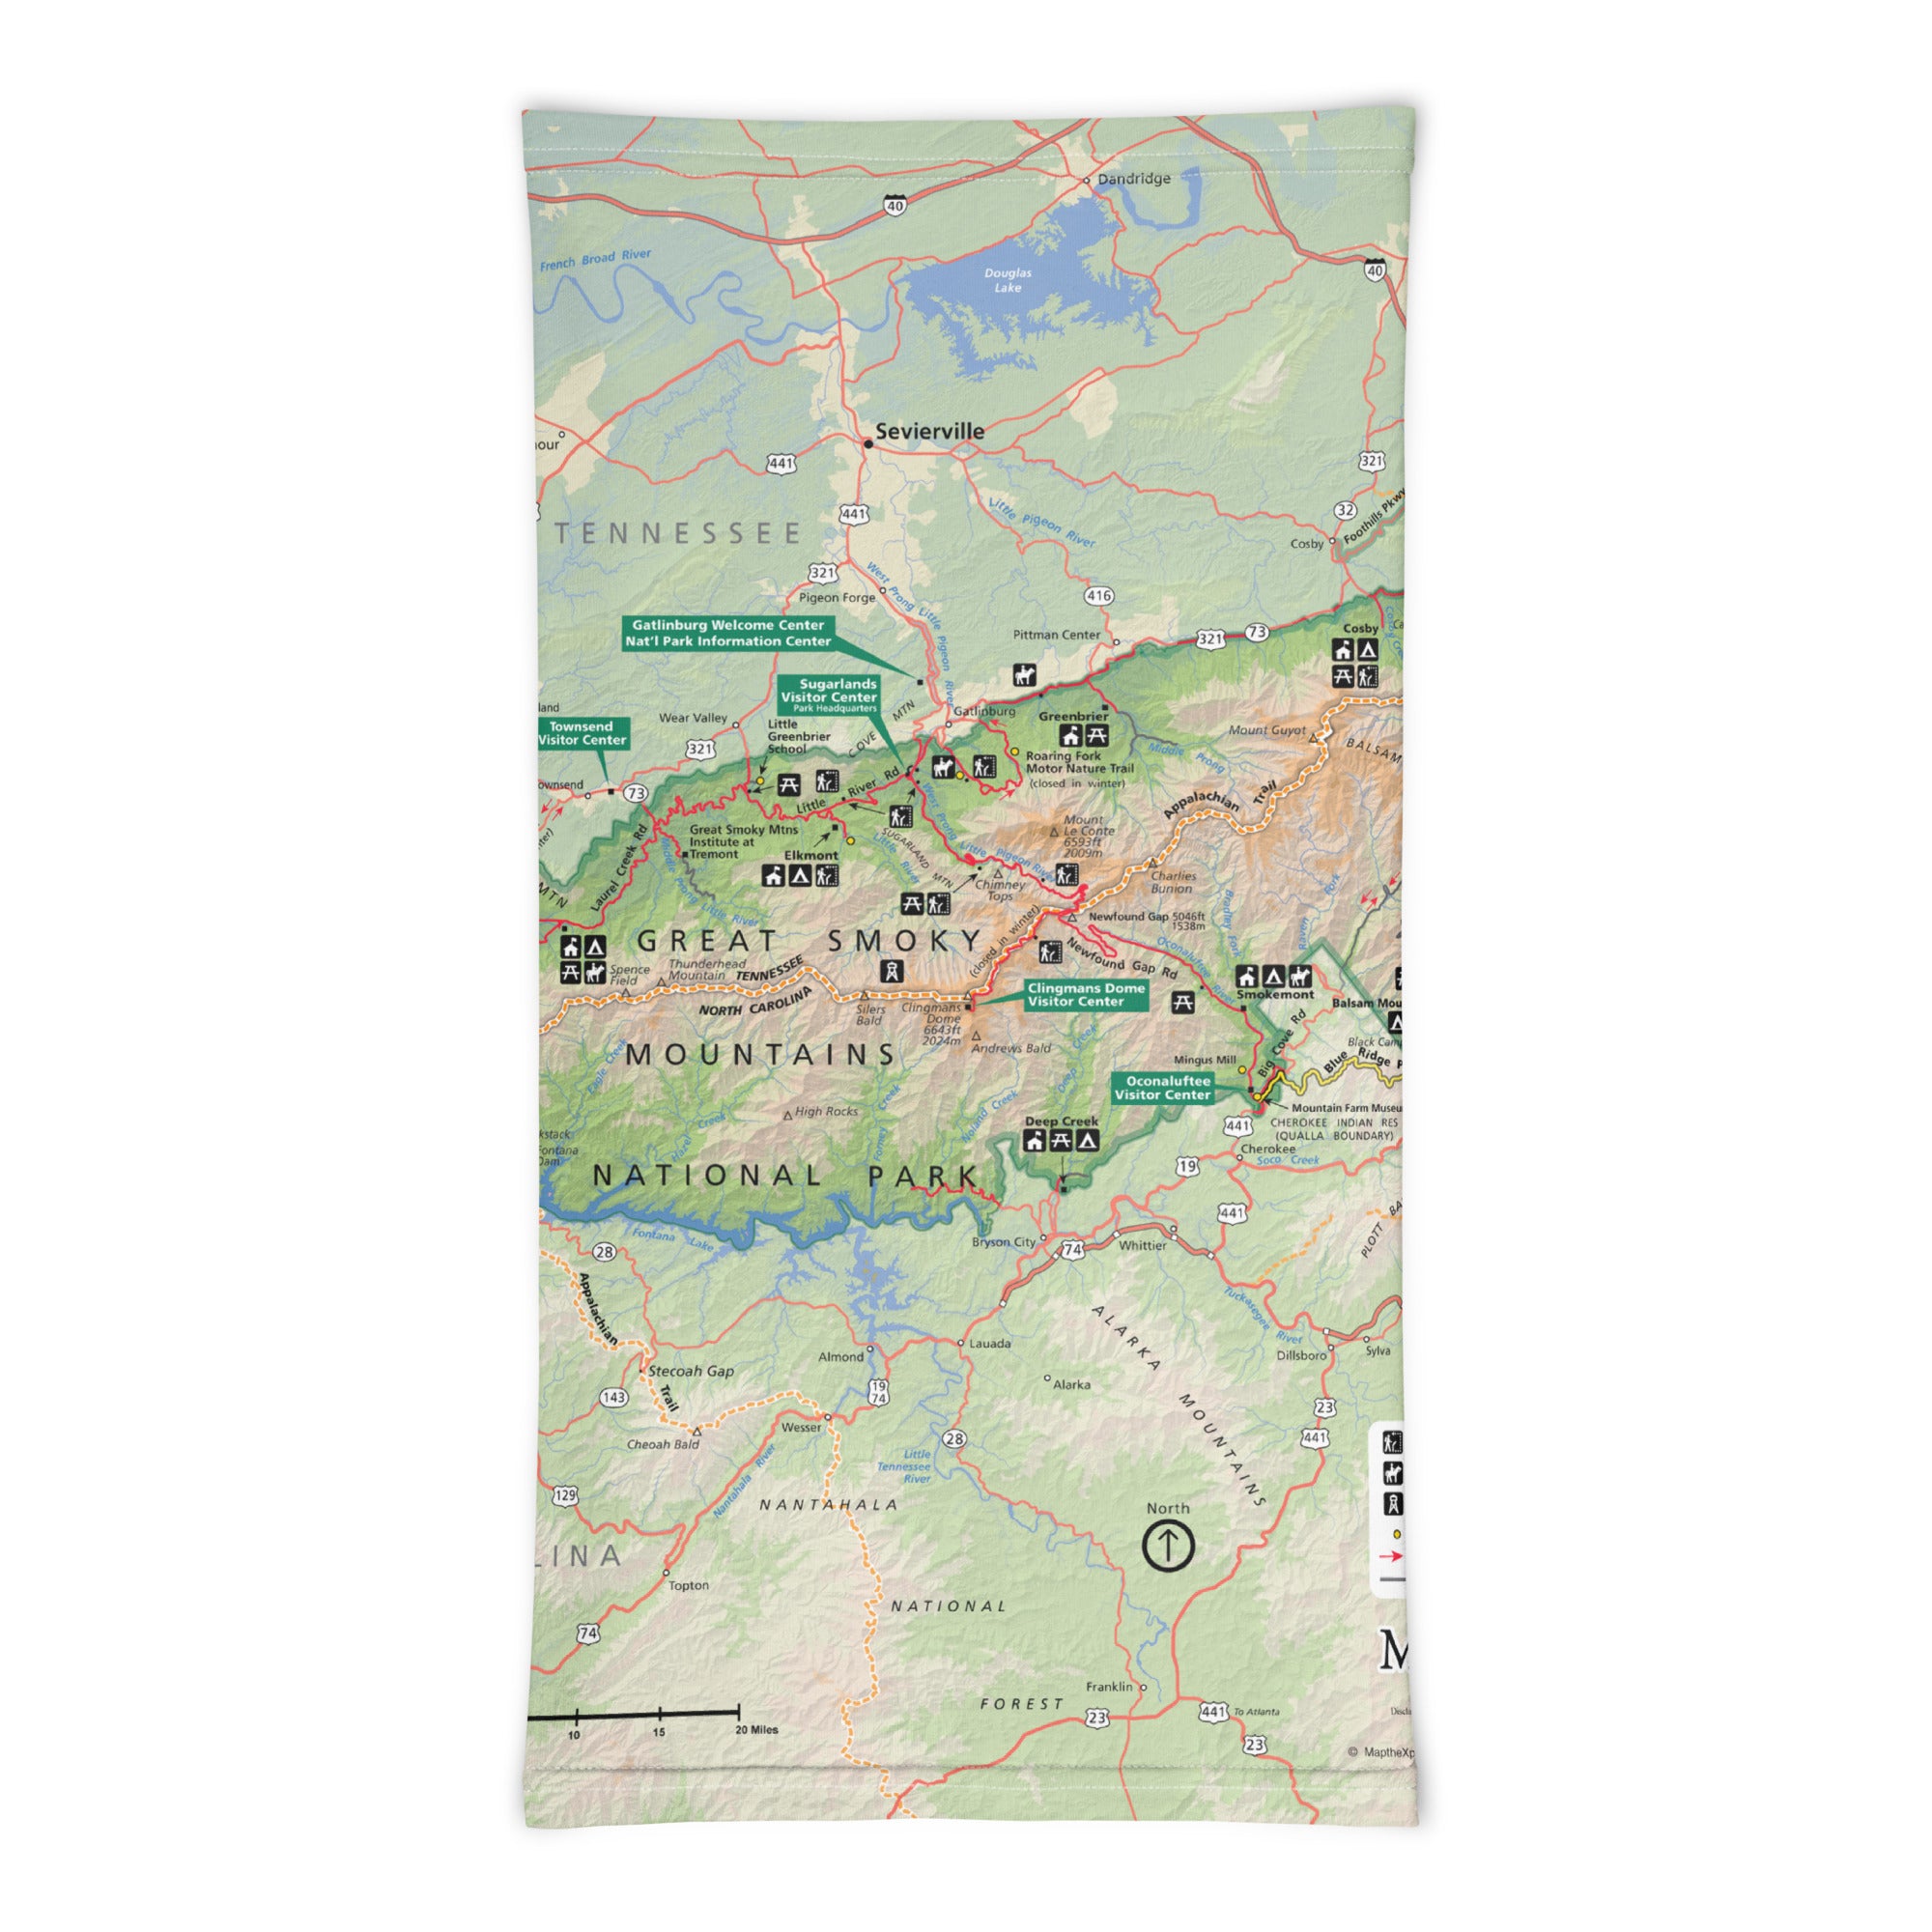 Great Smoky Mountains National Park Neck Gaiter